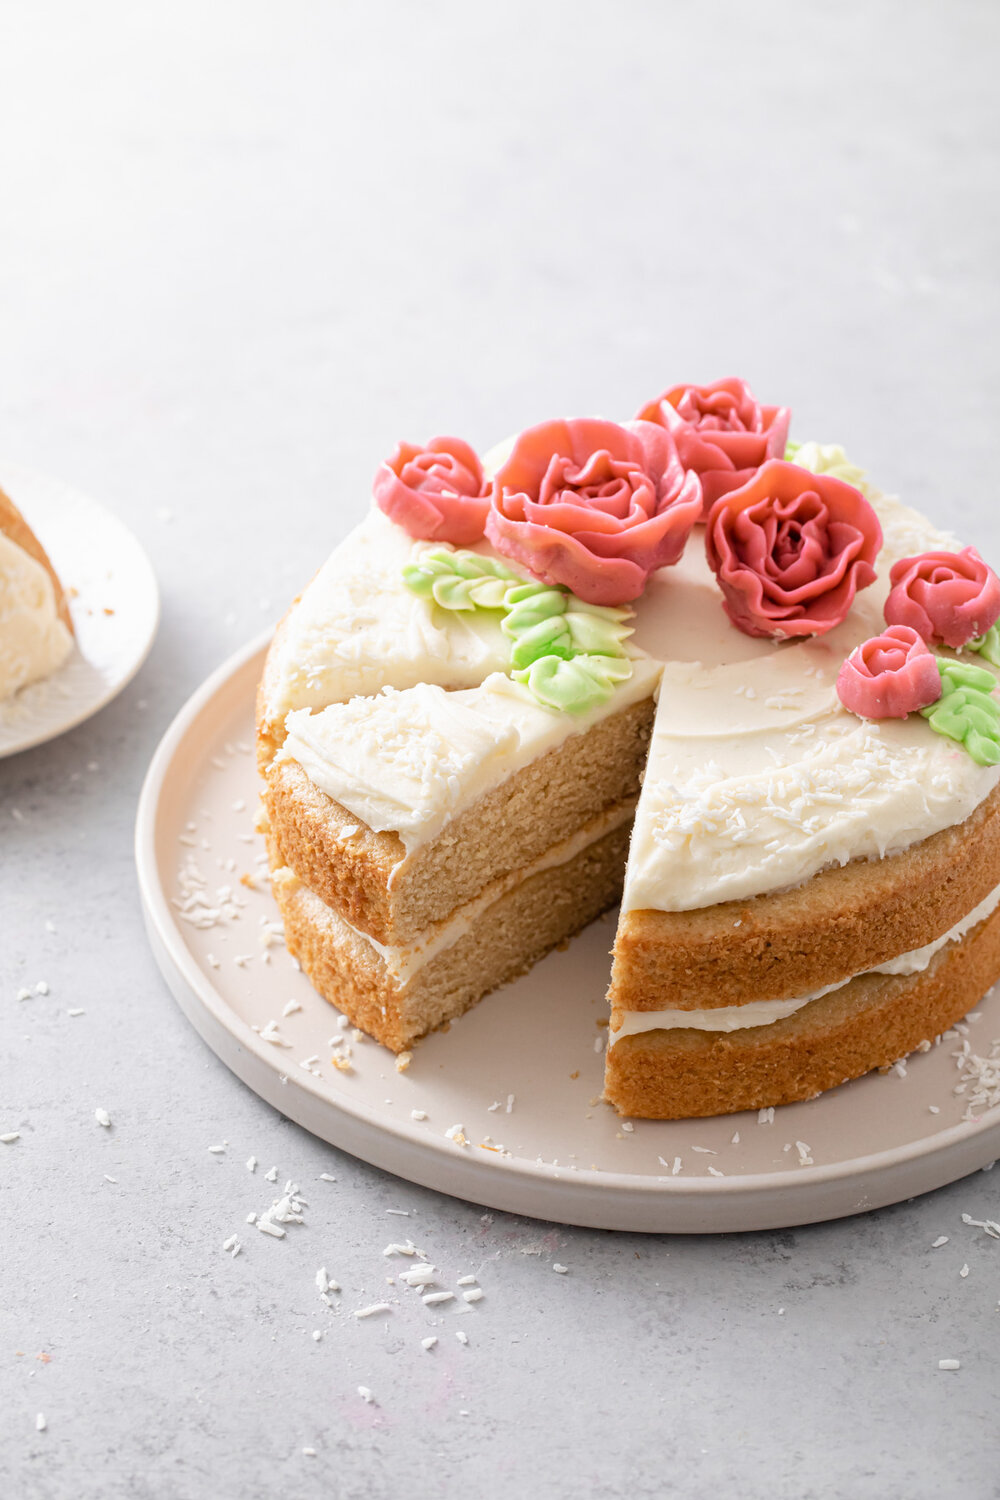 Almond Layer Cake with cream cheese frosting and buttercream flowers